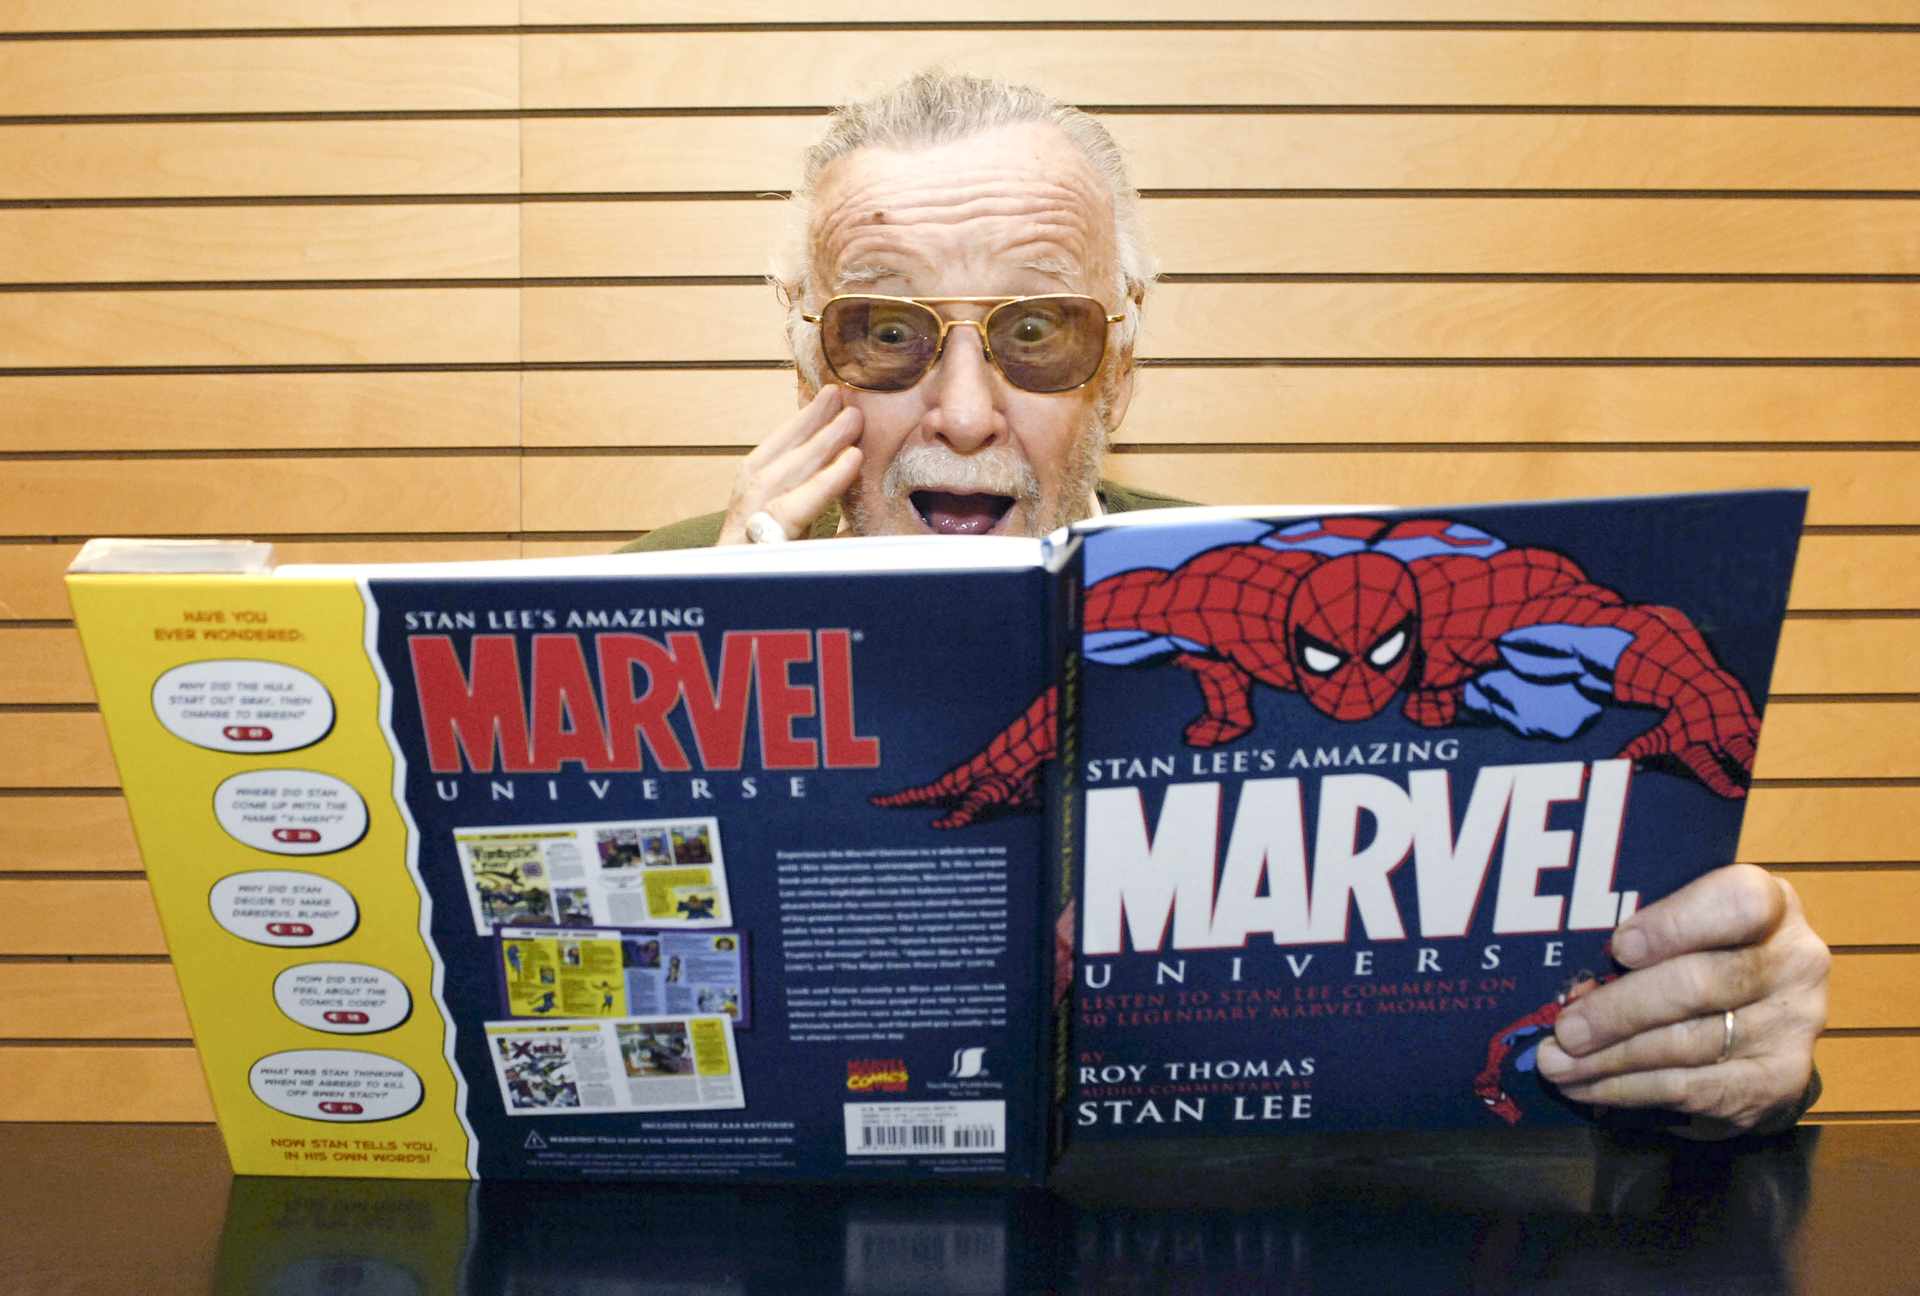 He created comics, movies, and superheroes. But Stan Lee lived for joy |  Digital Trends